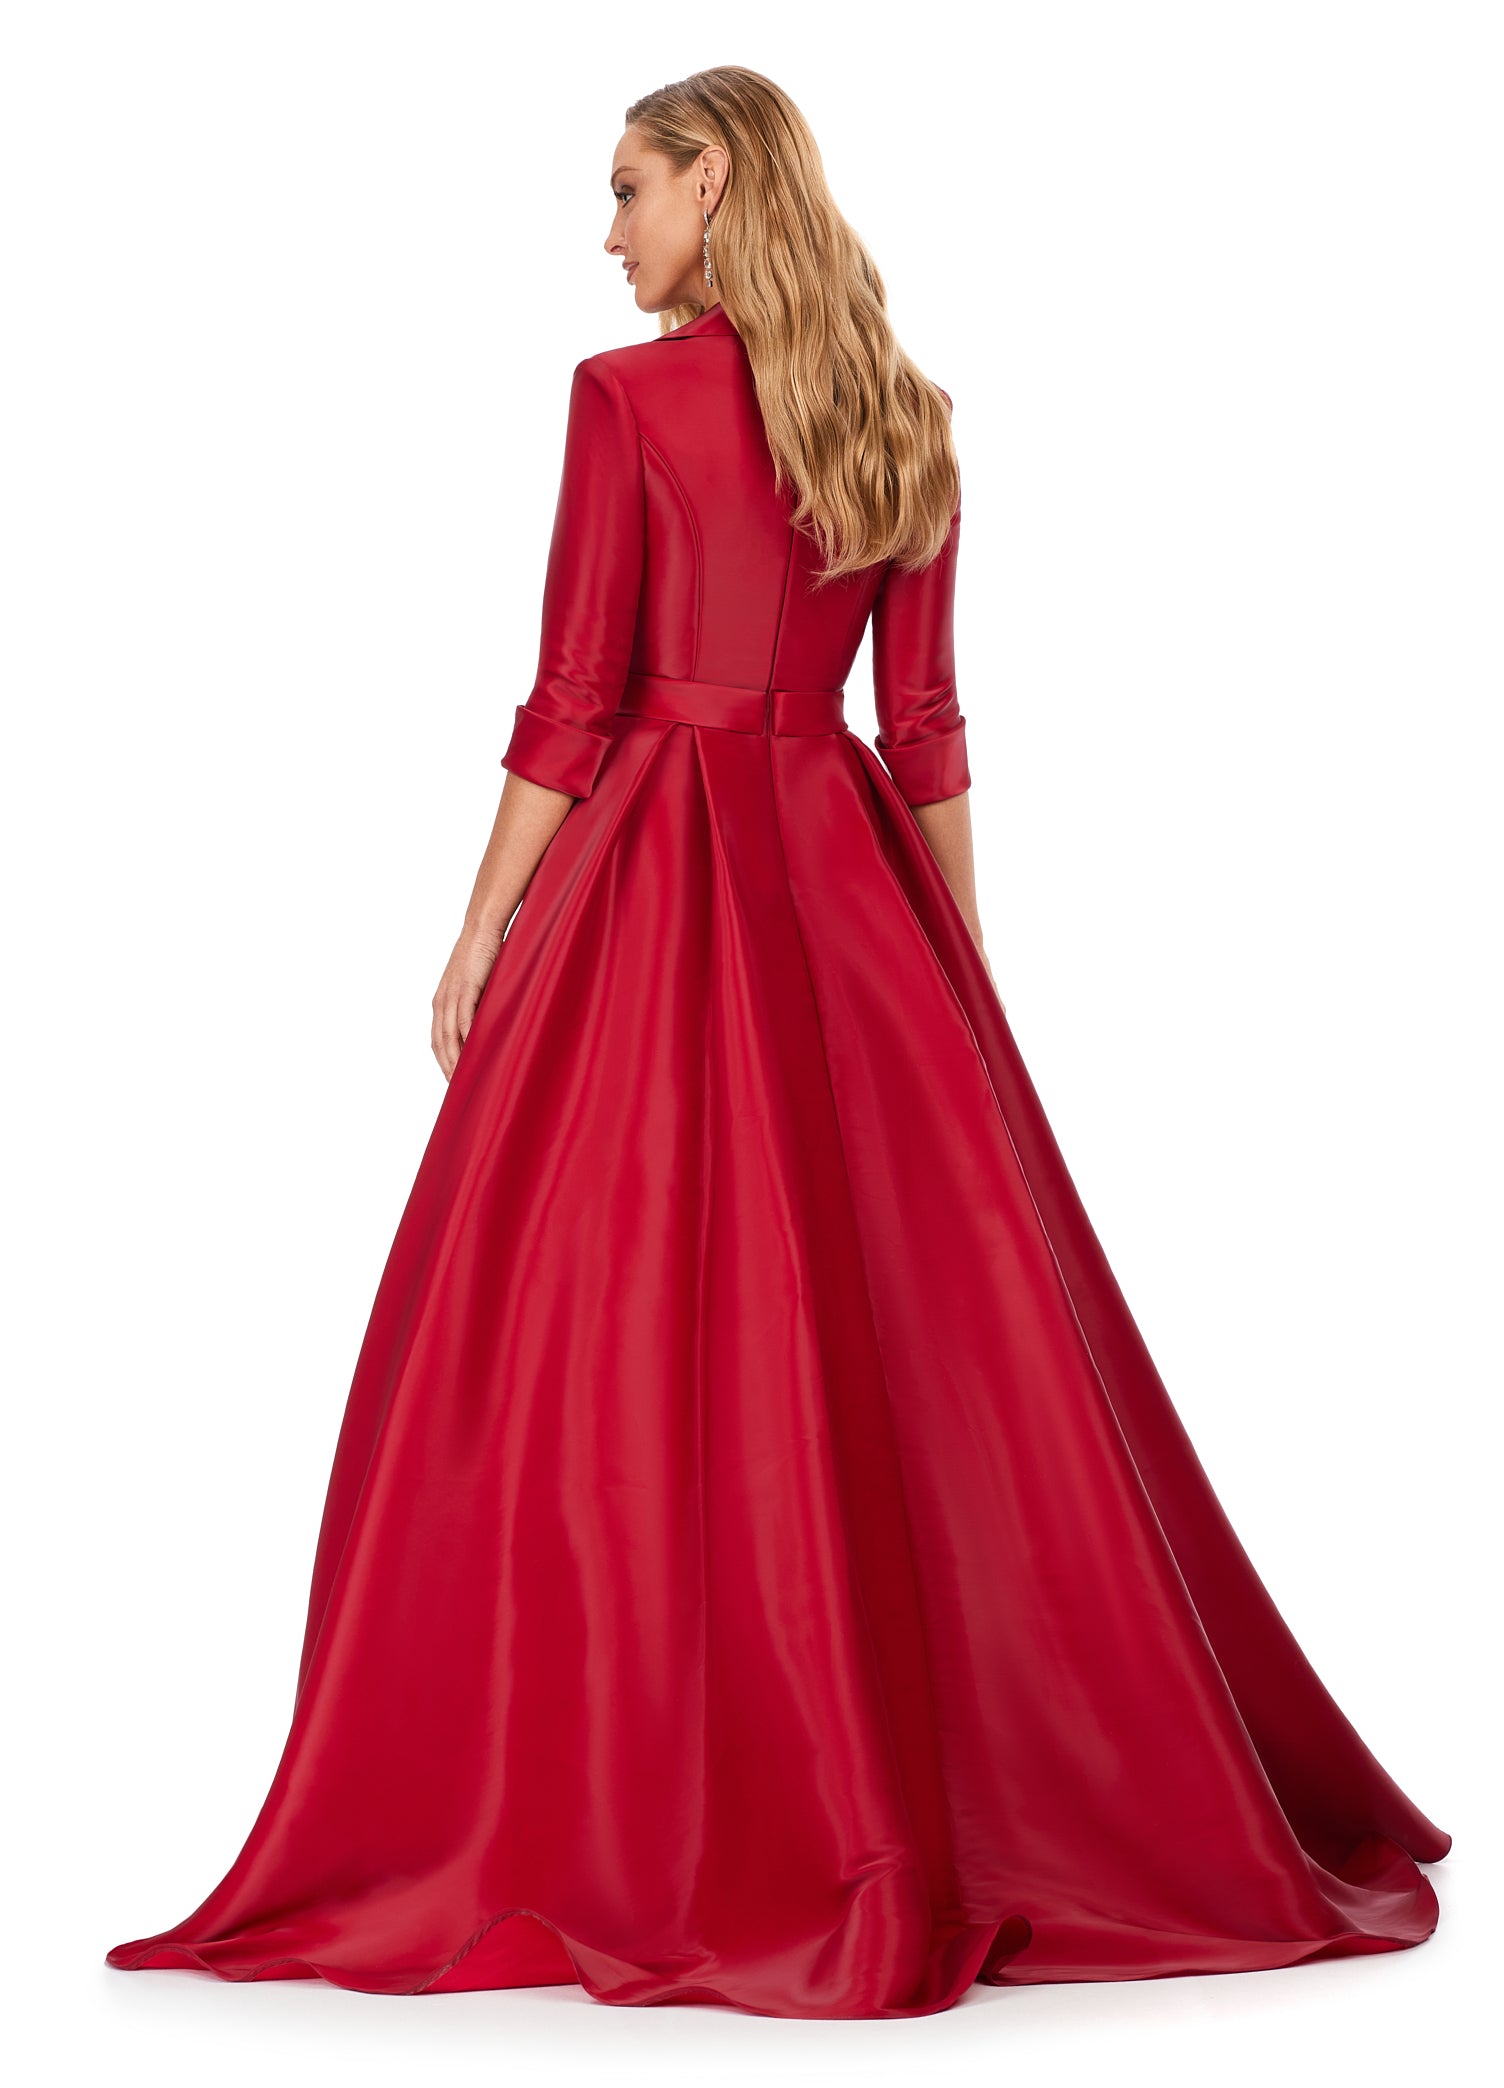 Ashley Lauren 11326 Satin Ballgown With Lapel V-Neck Gown. This stunning satin ball gown features a v-neckline. The bustier is complete with a wrap lapel that gives way to a buckled belt. *pssst...it also has pockets!